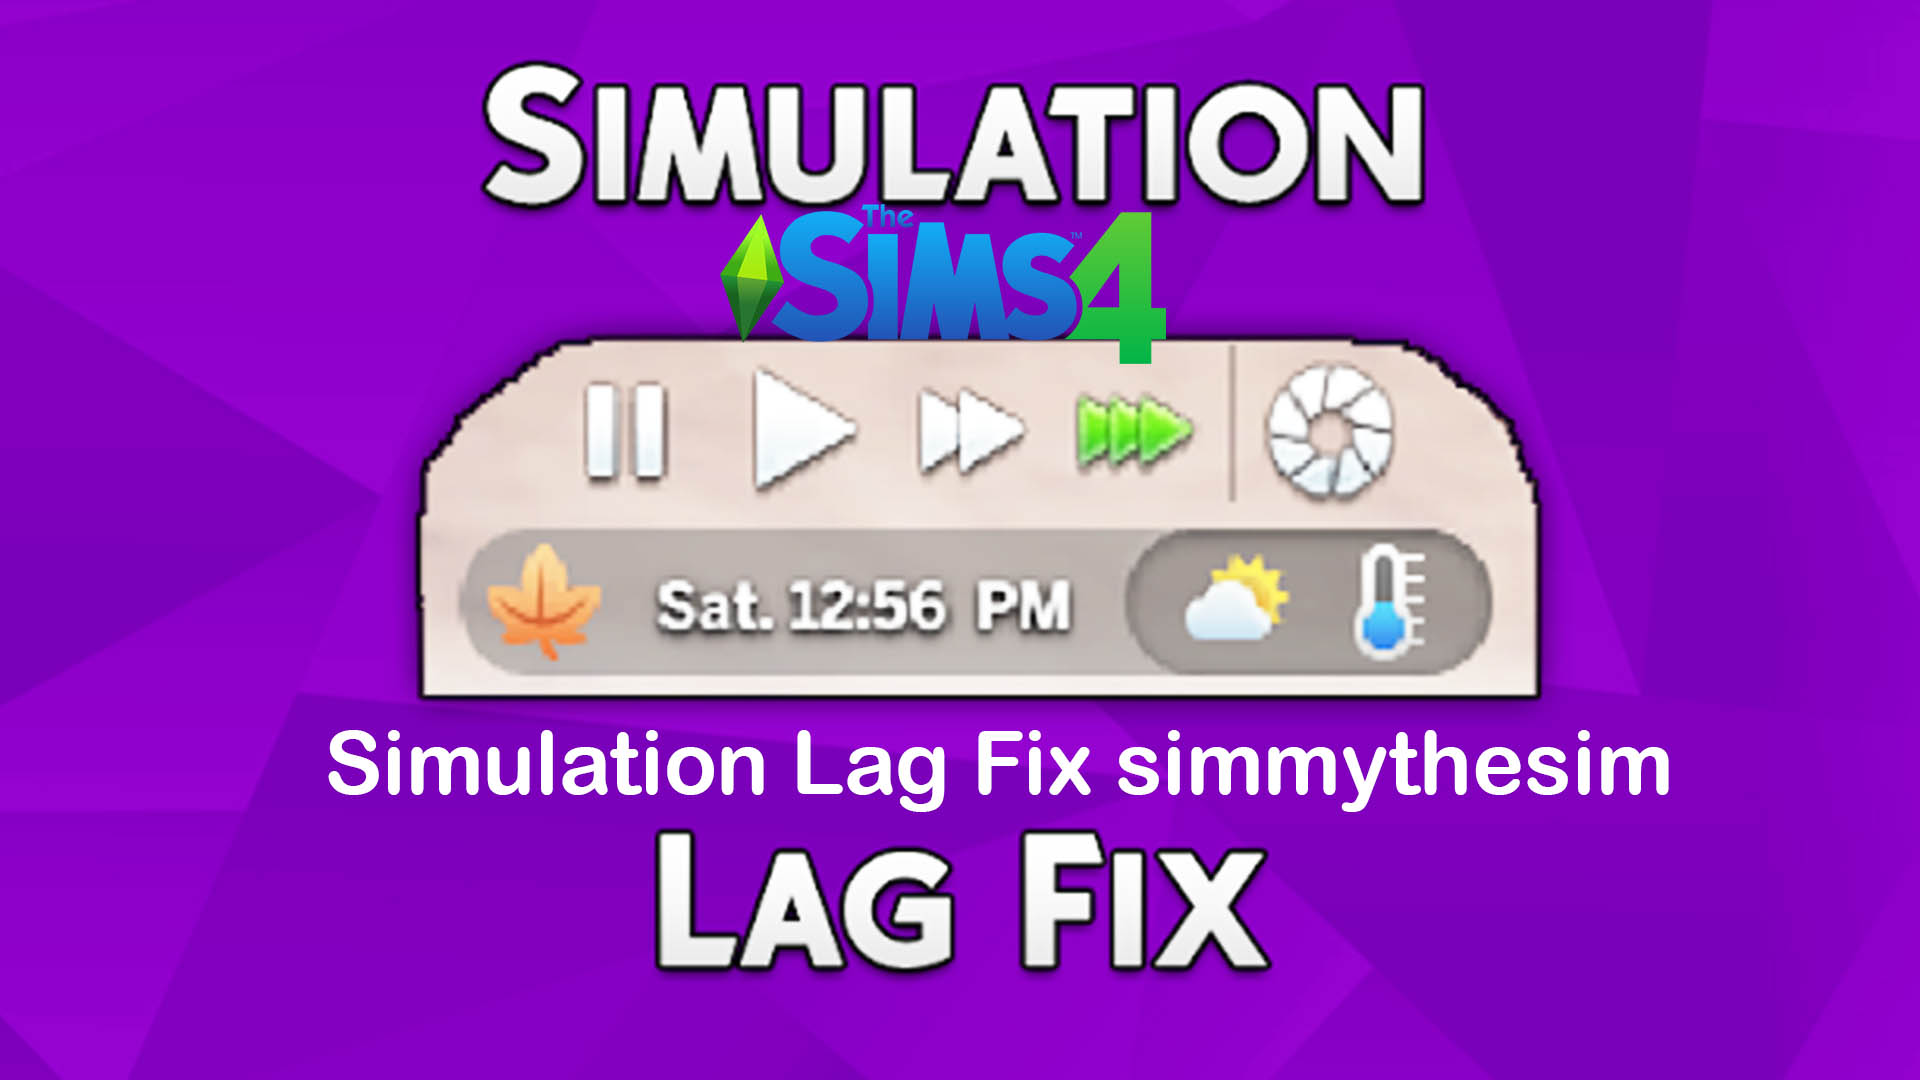 The Sims 4: Maxis Working on Simulation Lag Issues